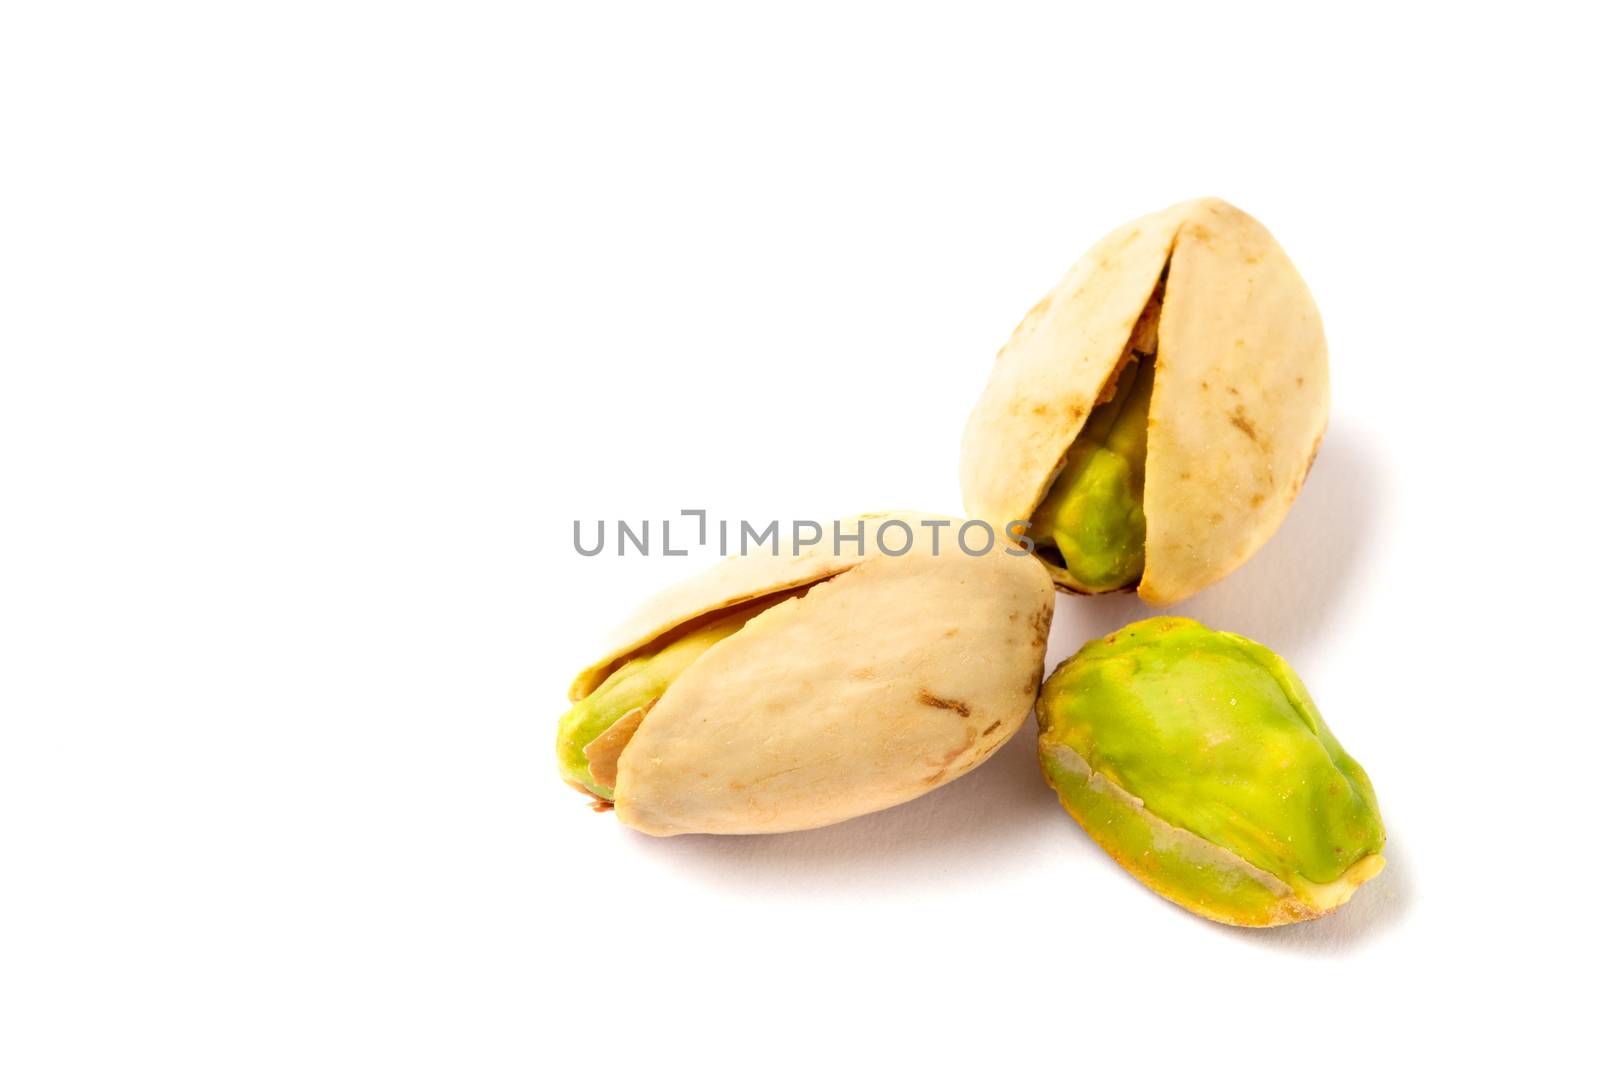 Pistachio nuts on a white background by 25ehaag6